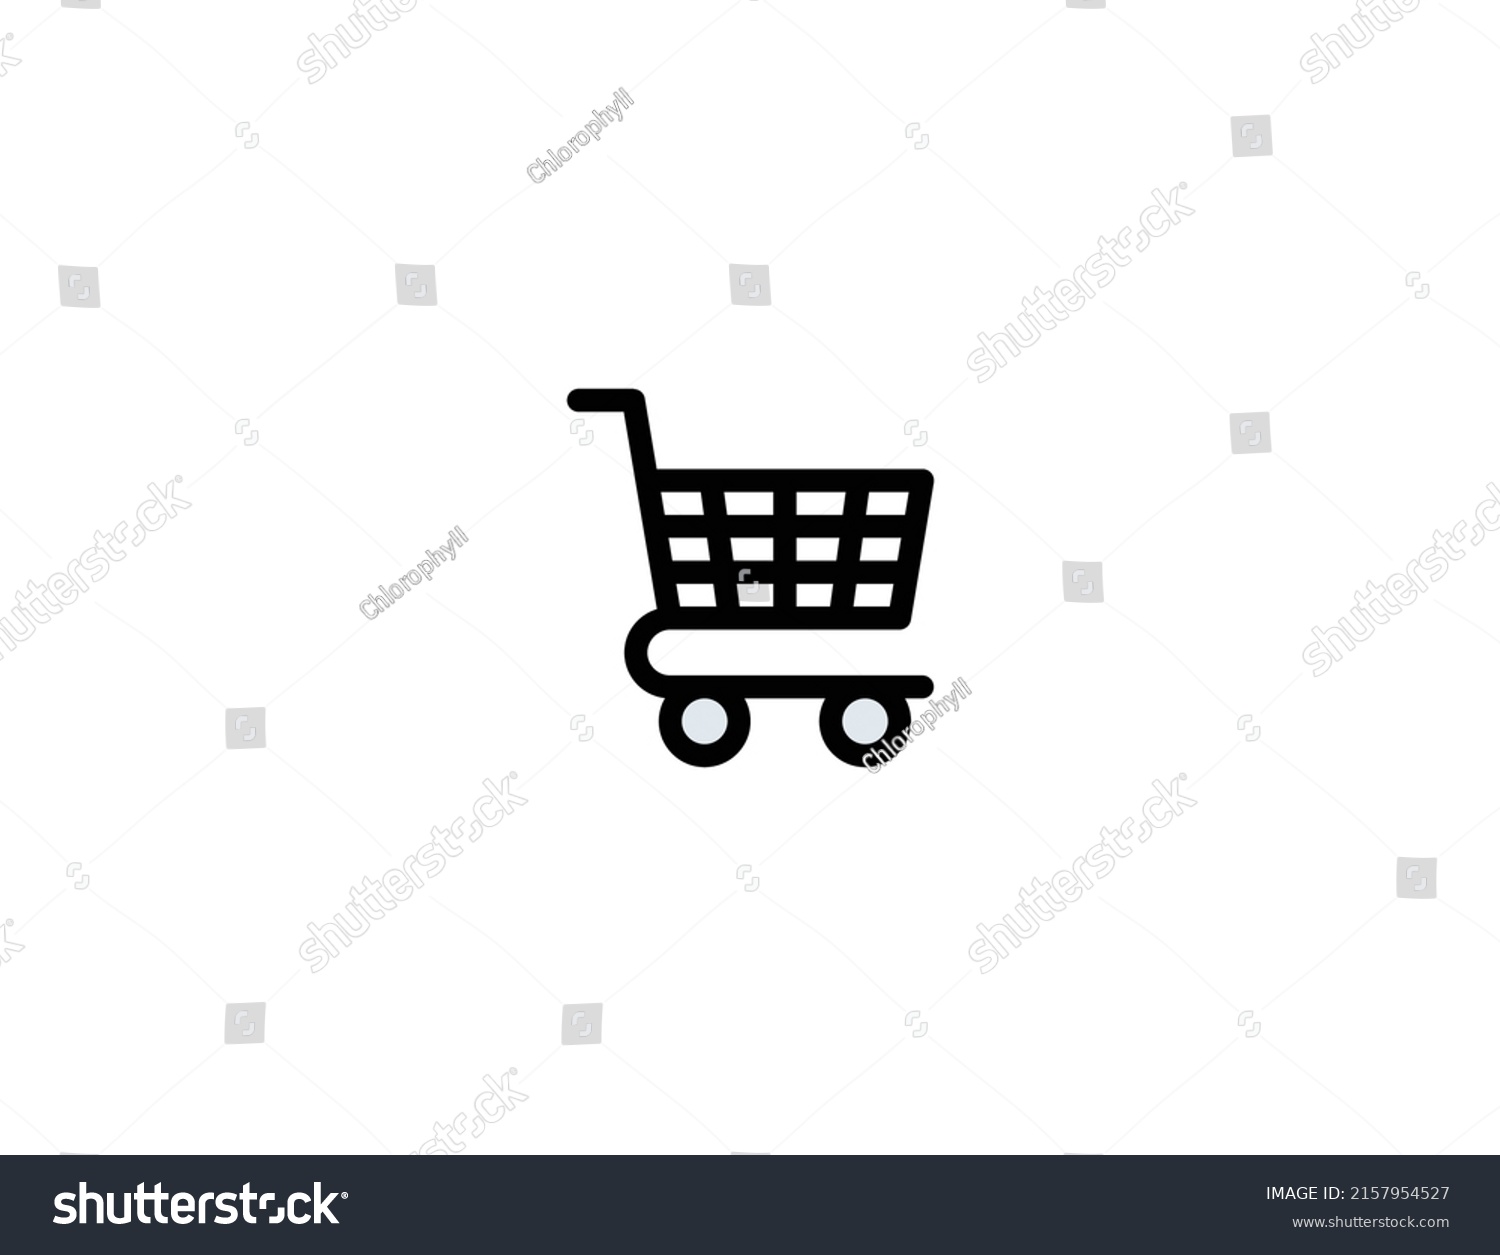 SVG of Shopping Cart isolated vector illustration icon. Shopping Cart emoji illustration icon svg